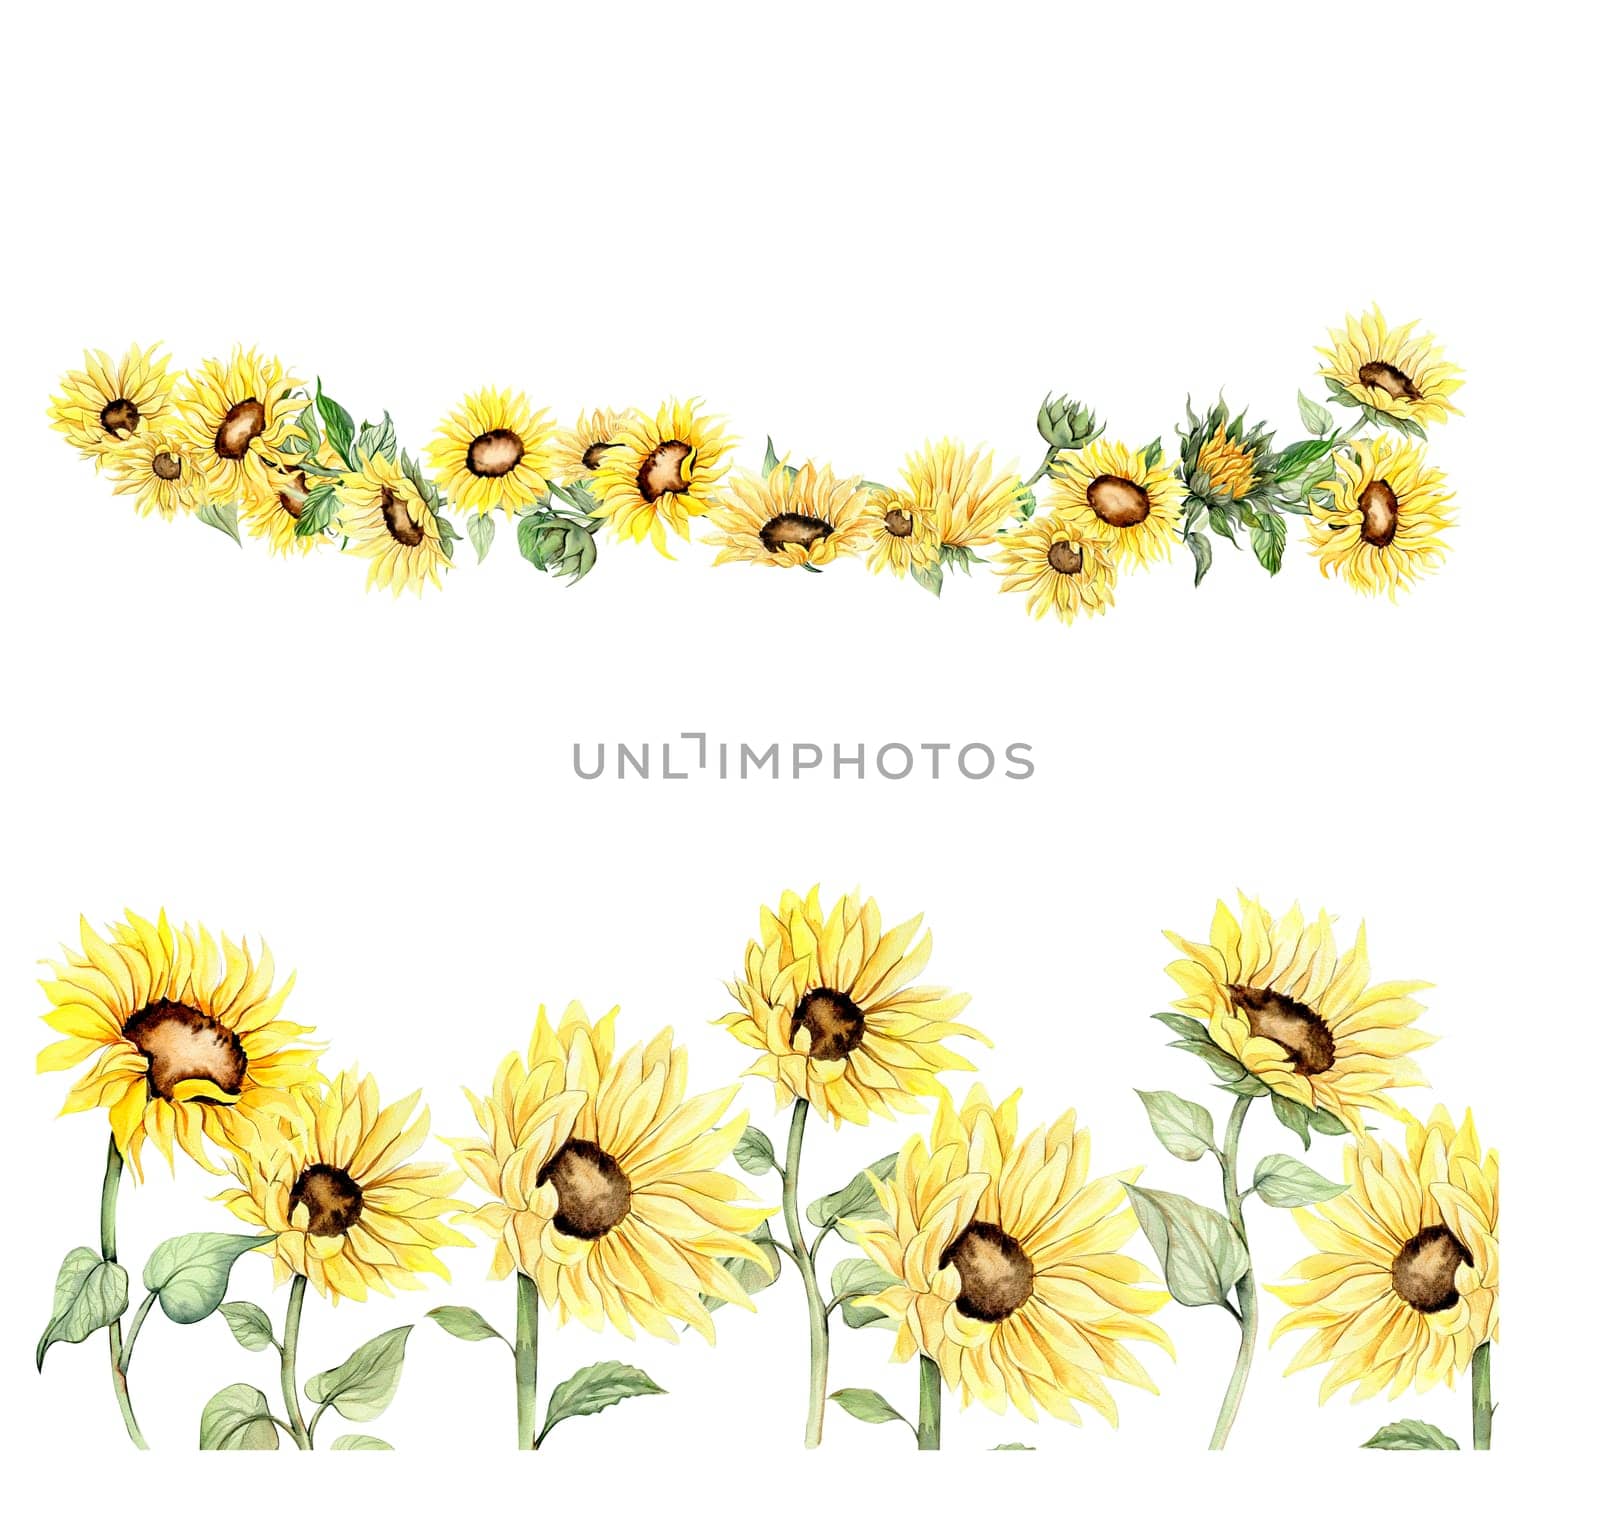 Watercolor horizontal seamless background with sunflowers set. Butterflies in cartoon style. Hand drawn illustration of summer.Perfect for scrapbooking, kids design,wedding invitation,greetings cards.